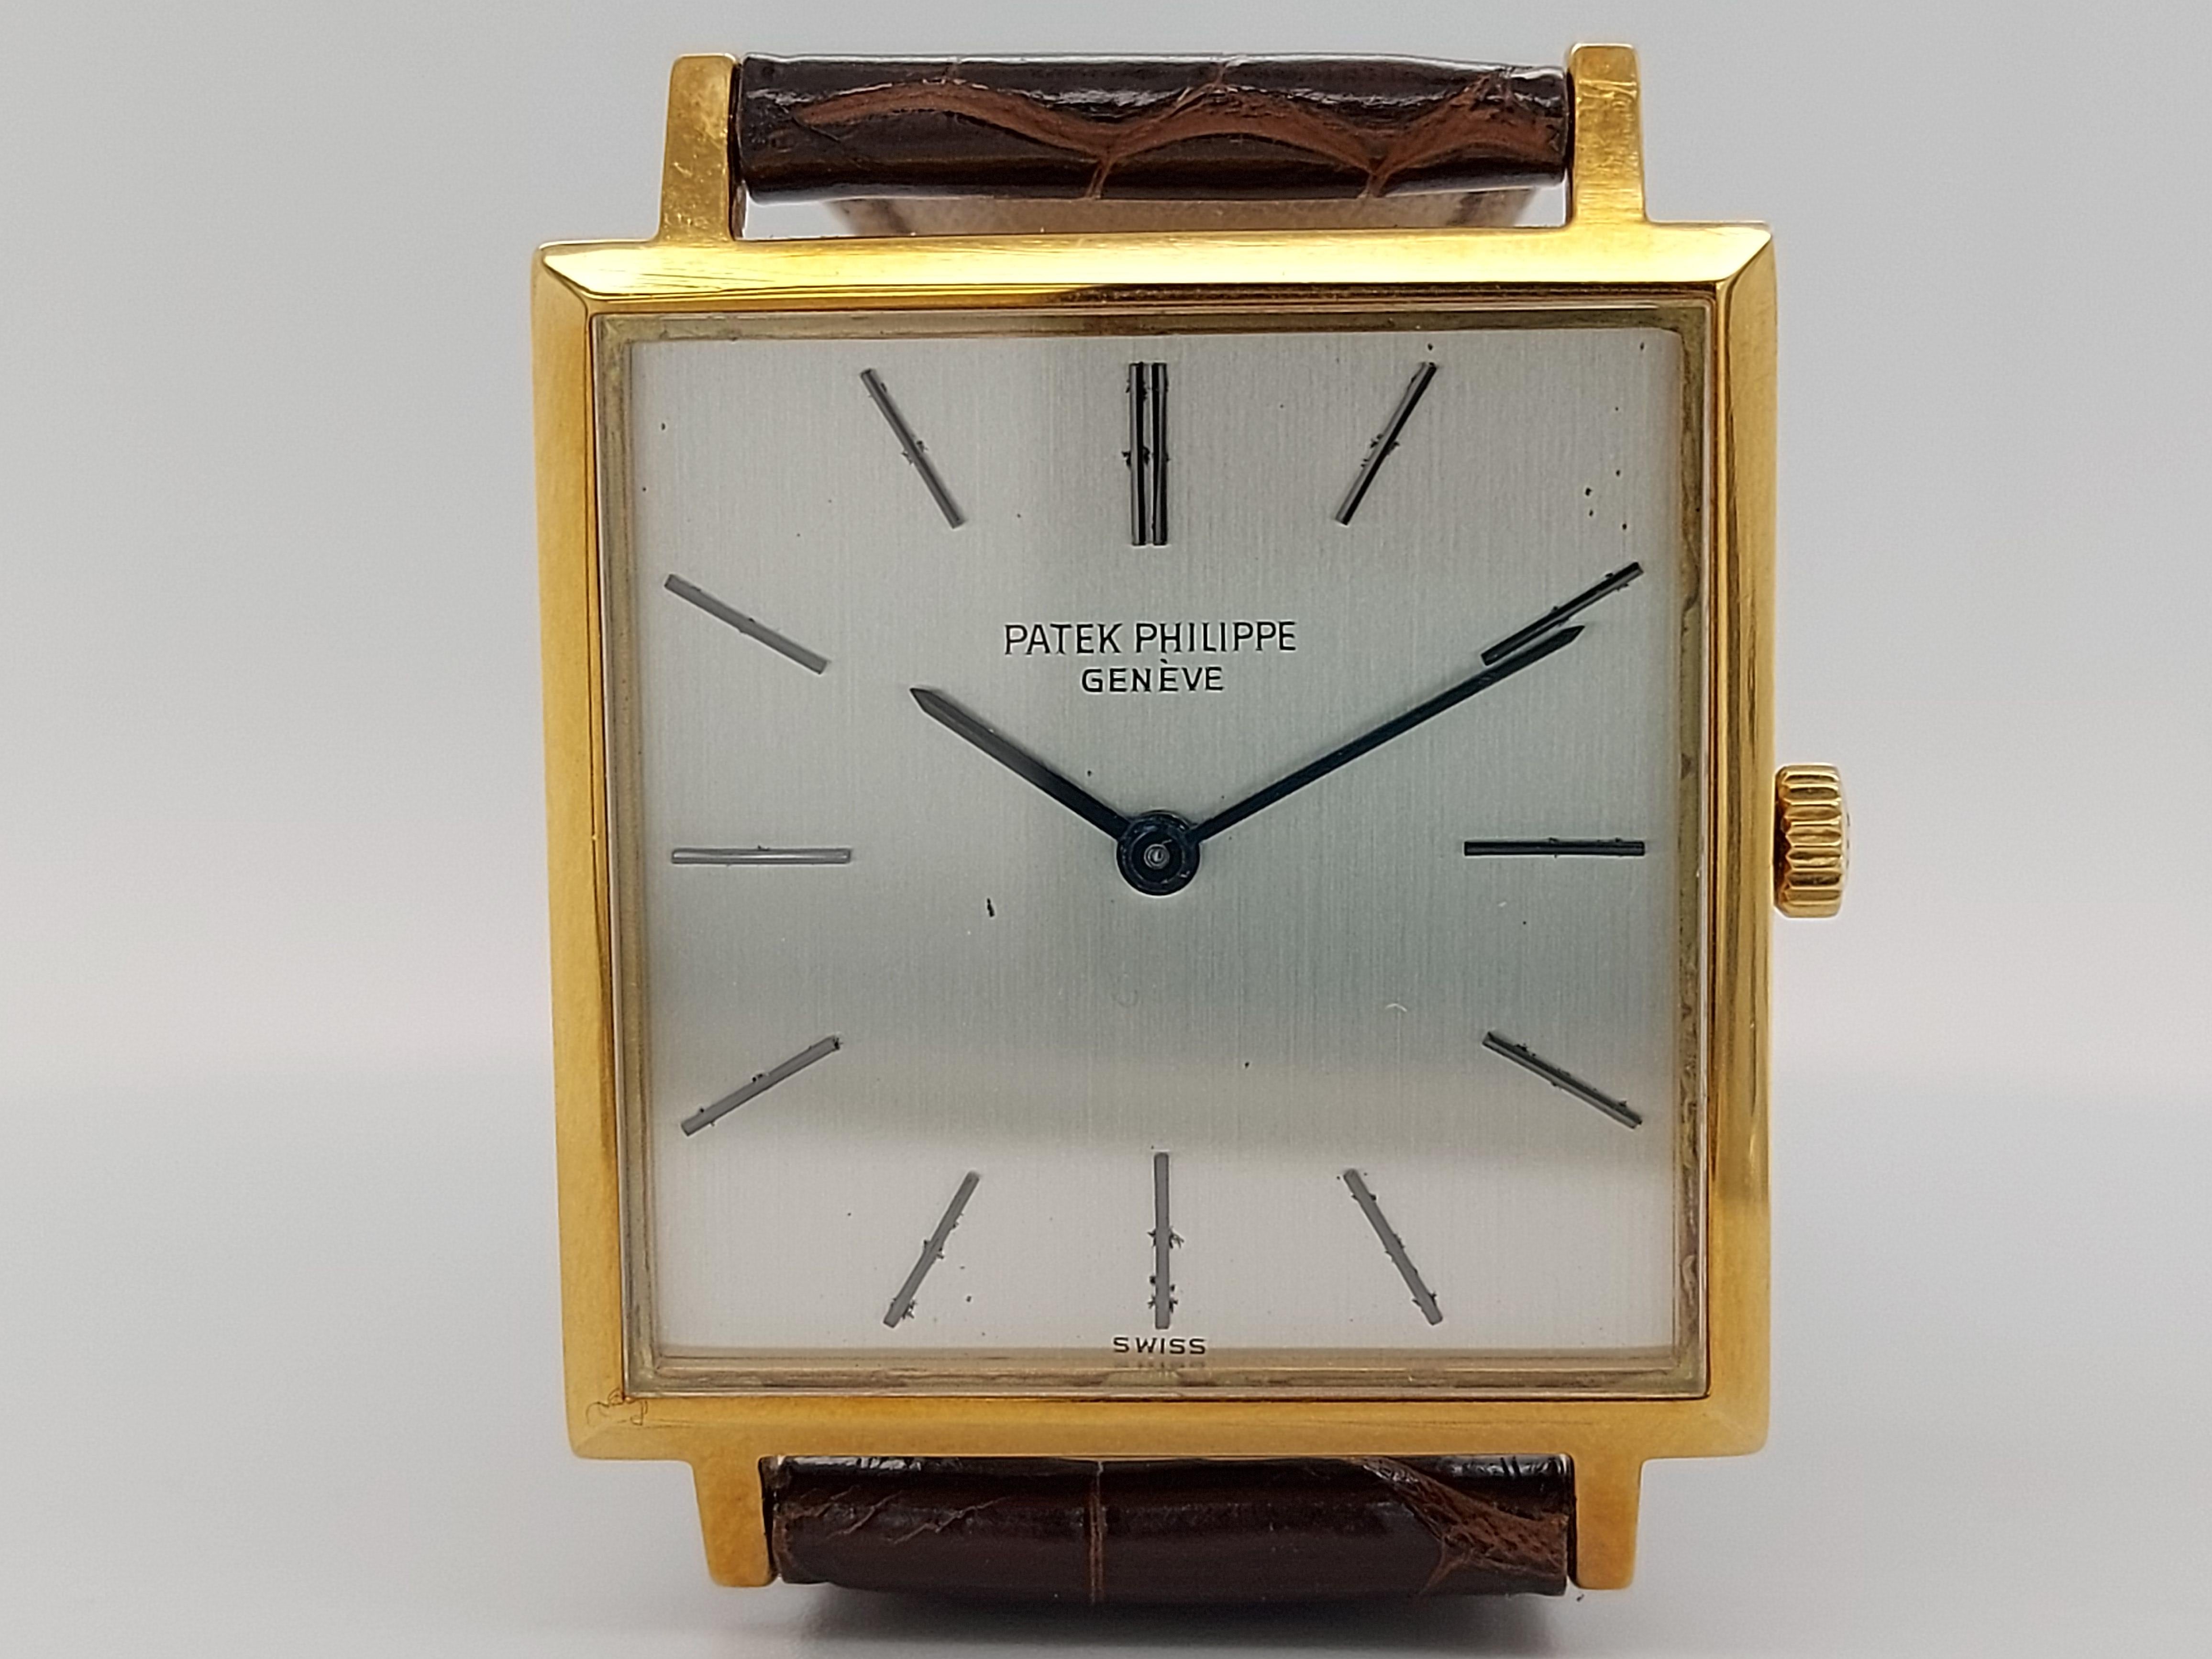 Square Vintage Patek Philippe 18Kt Solid Gold From 1970 with Extract from the Archives

Reference: 3555

Movement: Manual winding

Caliber: 175

Case: 18kt Yellow gold, Dimensions 27 mm x 27 mm, Thickness 4.6 mm, Signed genuine Patek crown, Splash